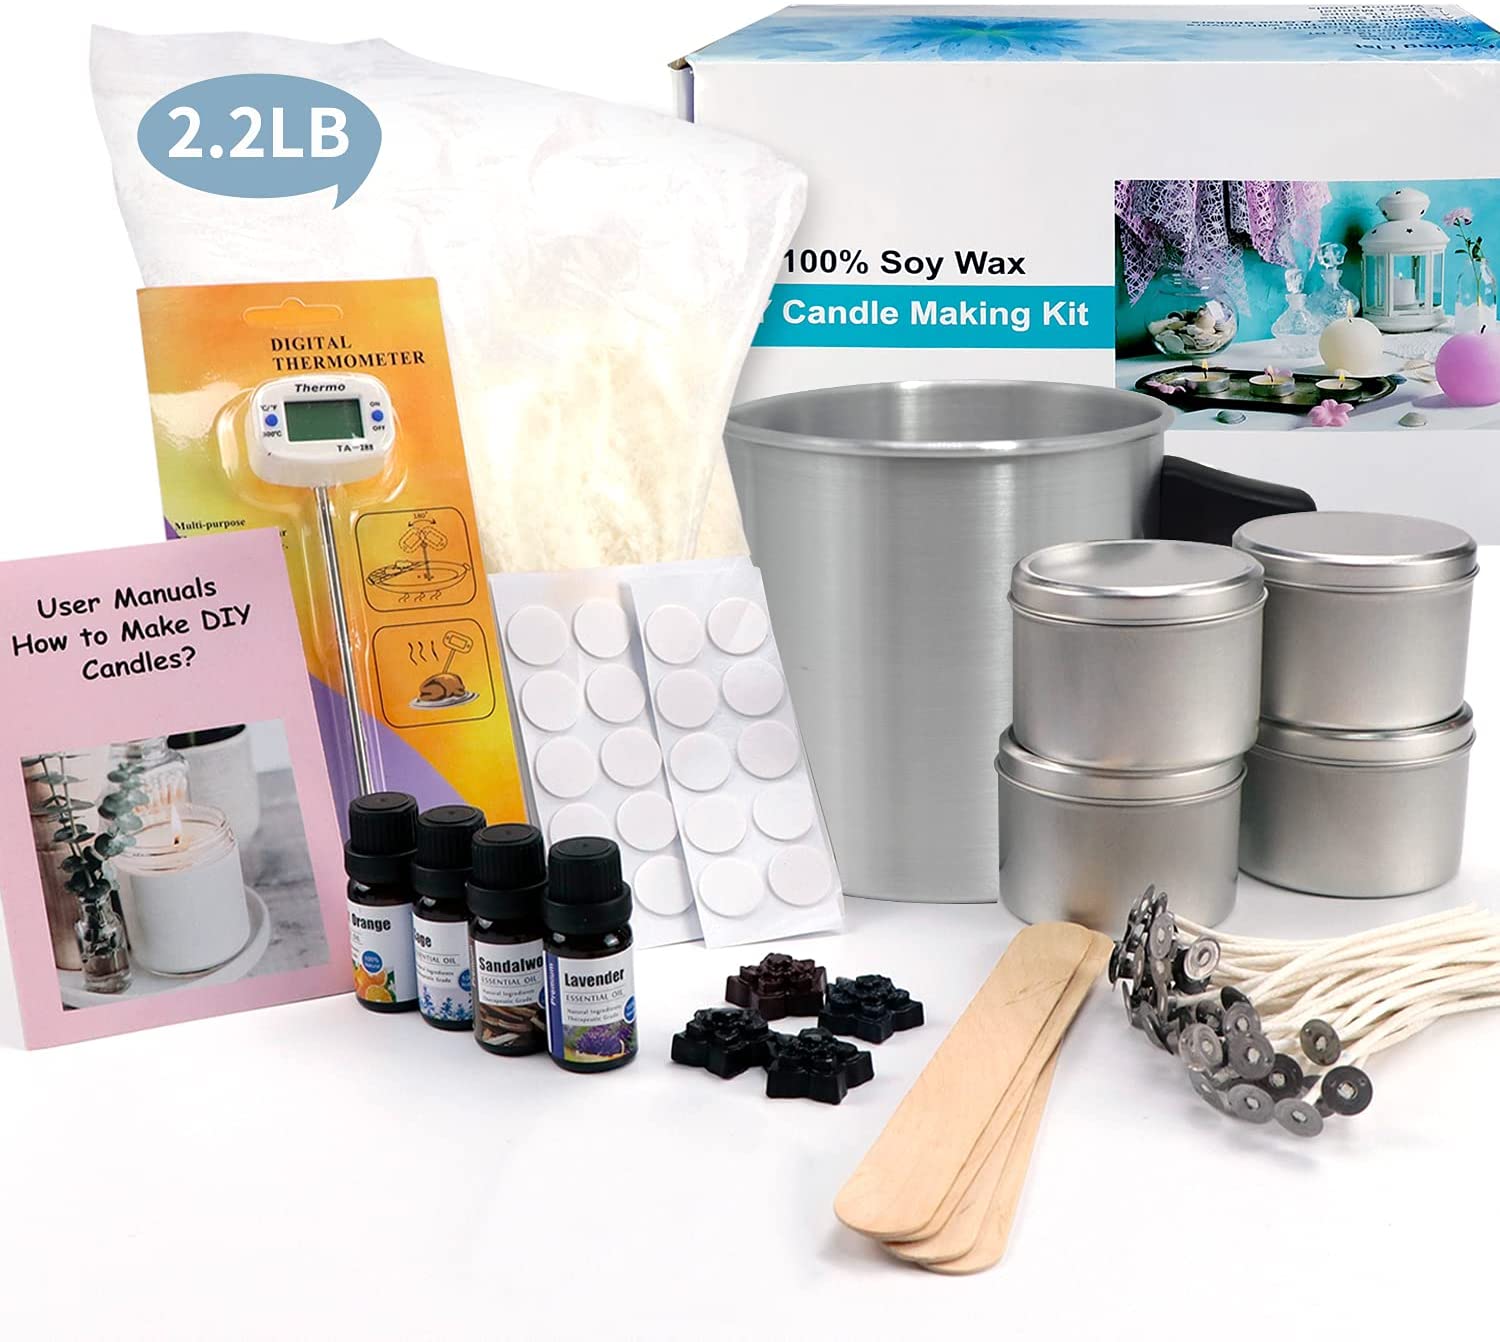 Candle Making Kit – Easy to Make Colored Candle Soy Wax Kit Include Wax,  Rich Scents, Dyes, Wicks, Tins & More